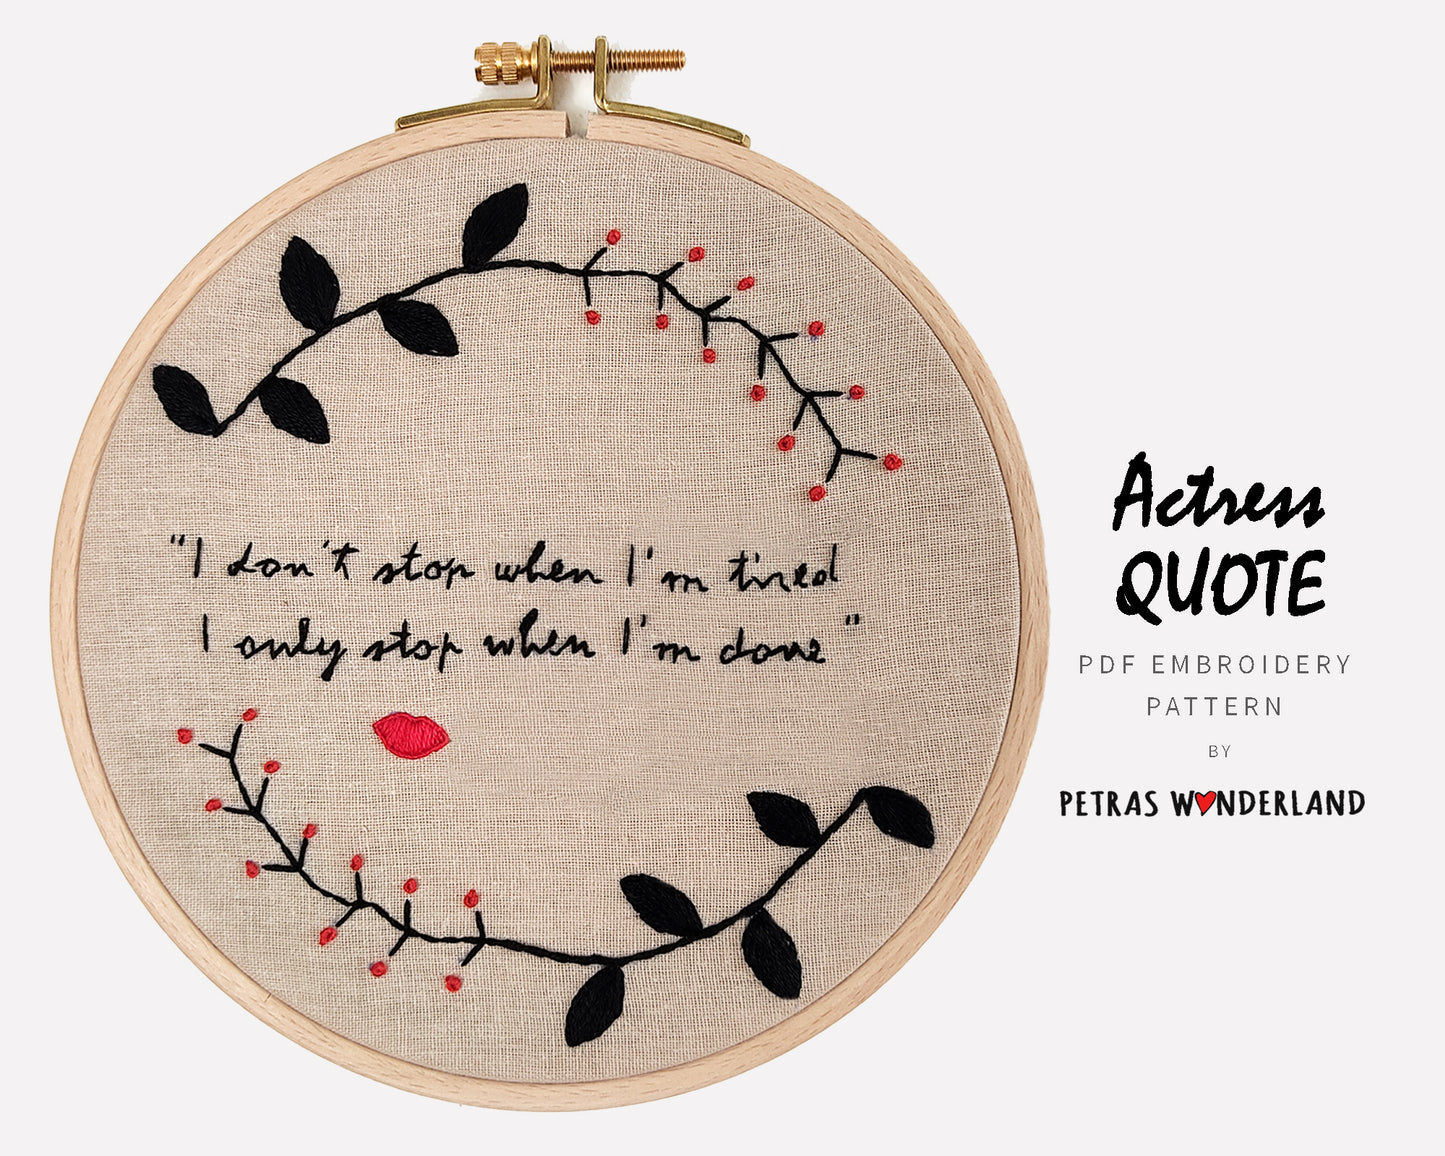 Actress Quote - PDF embroidery pattern and tutorial